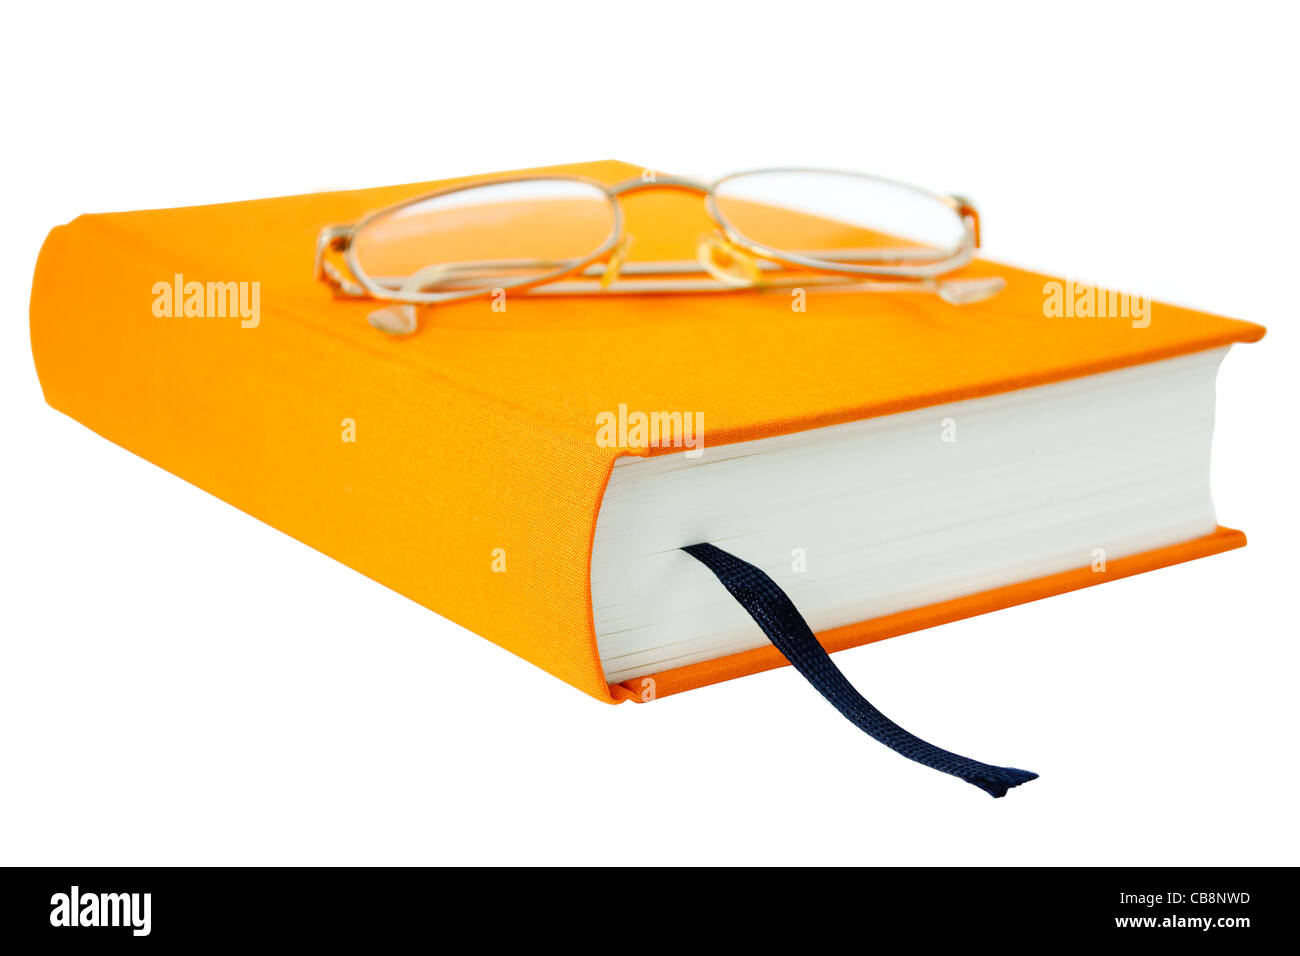 https://c8.alamy.com/comp/CB8NWD/photo-of-the-orange-book-with-glasses-isolated-on-white-background-CB8NWD.jpg